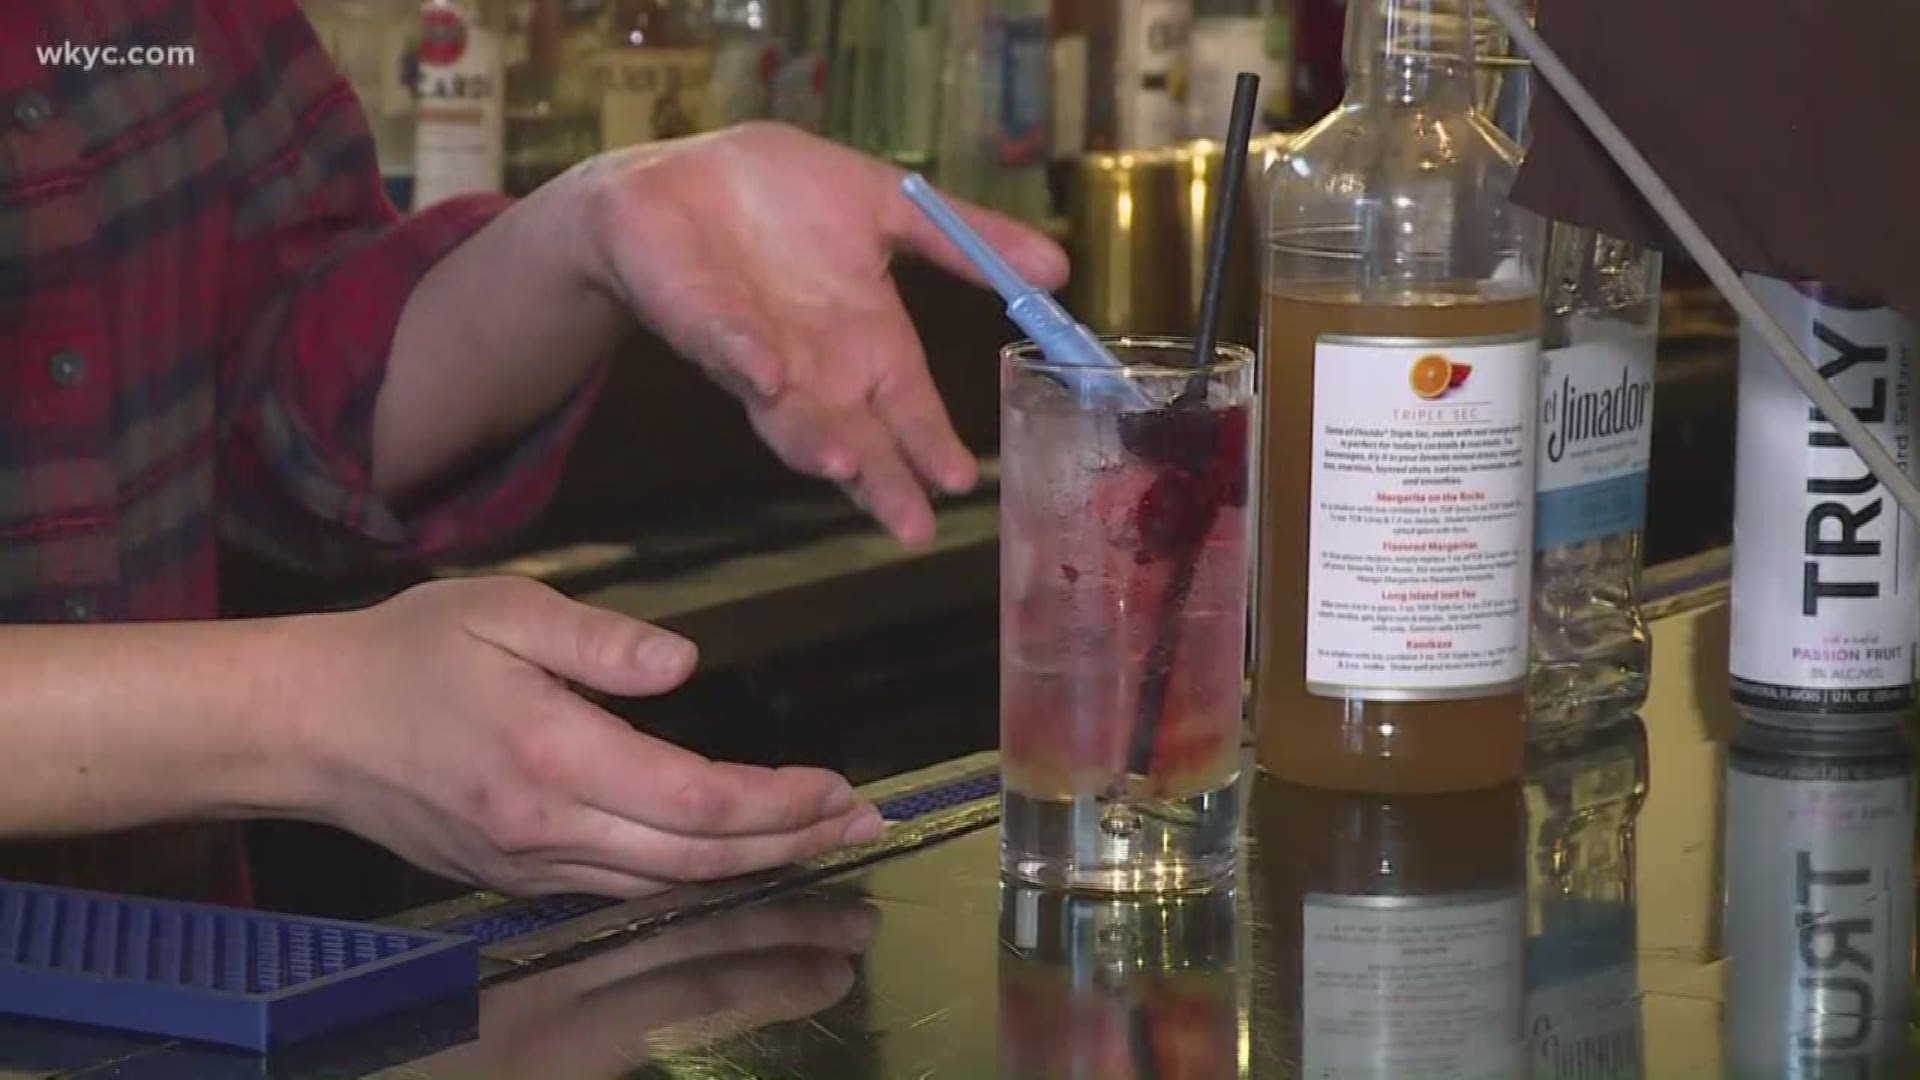 Controversy brews over drink garnish fundraiser in Lakewood